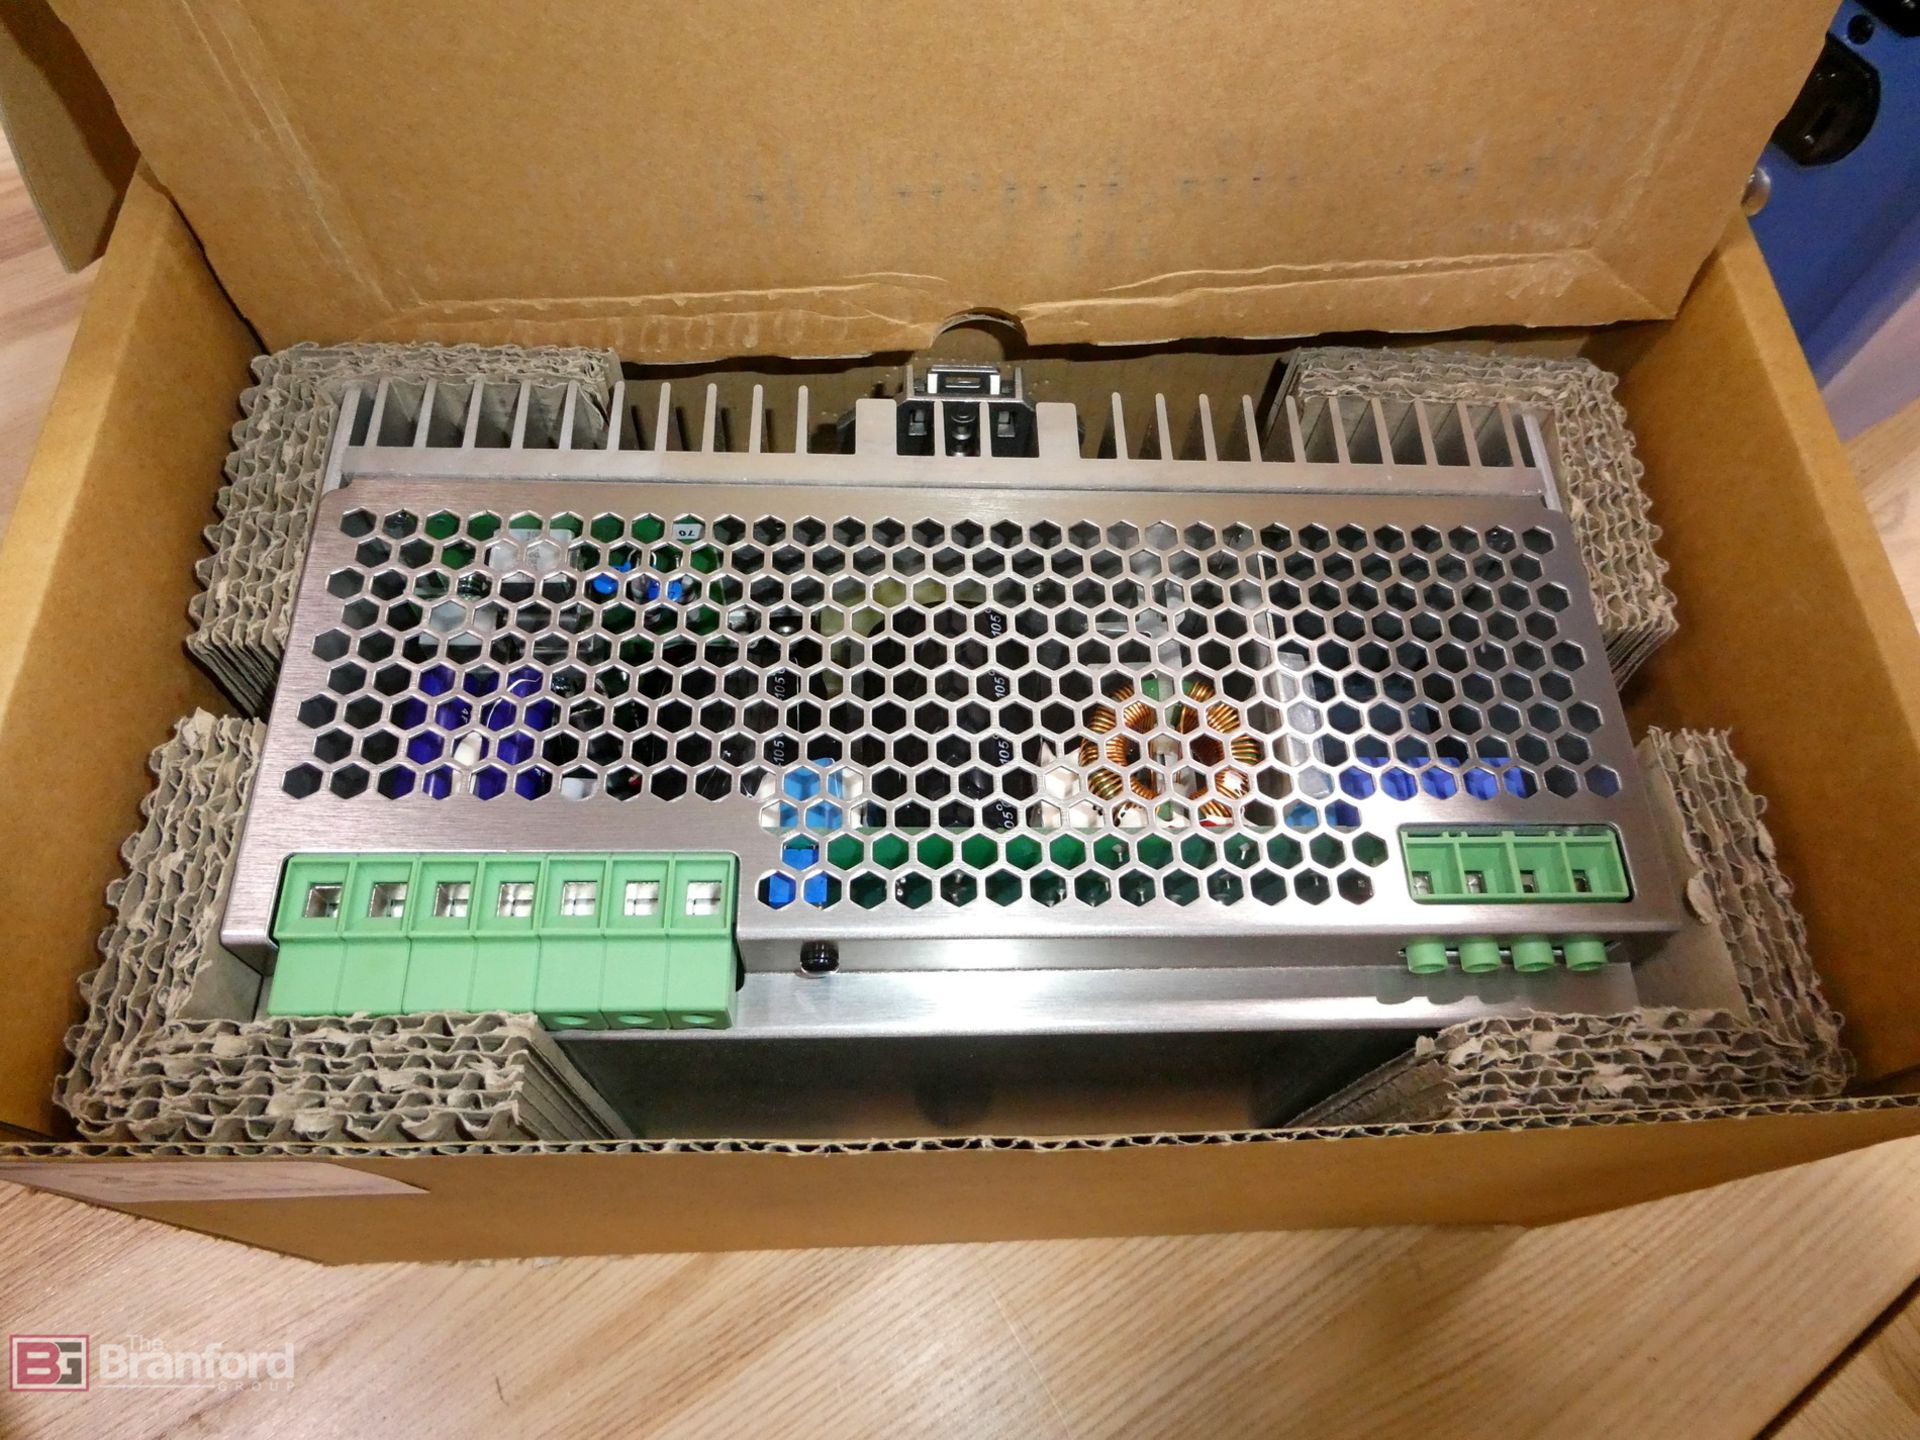 (2) Phoenix Contact Quint-PS-3x400-500AC/24DC/40, Power Supplies - Image 4 of 6